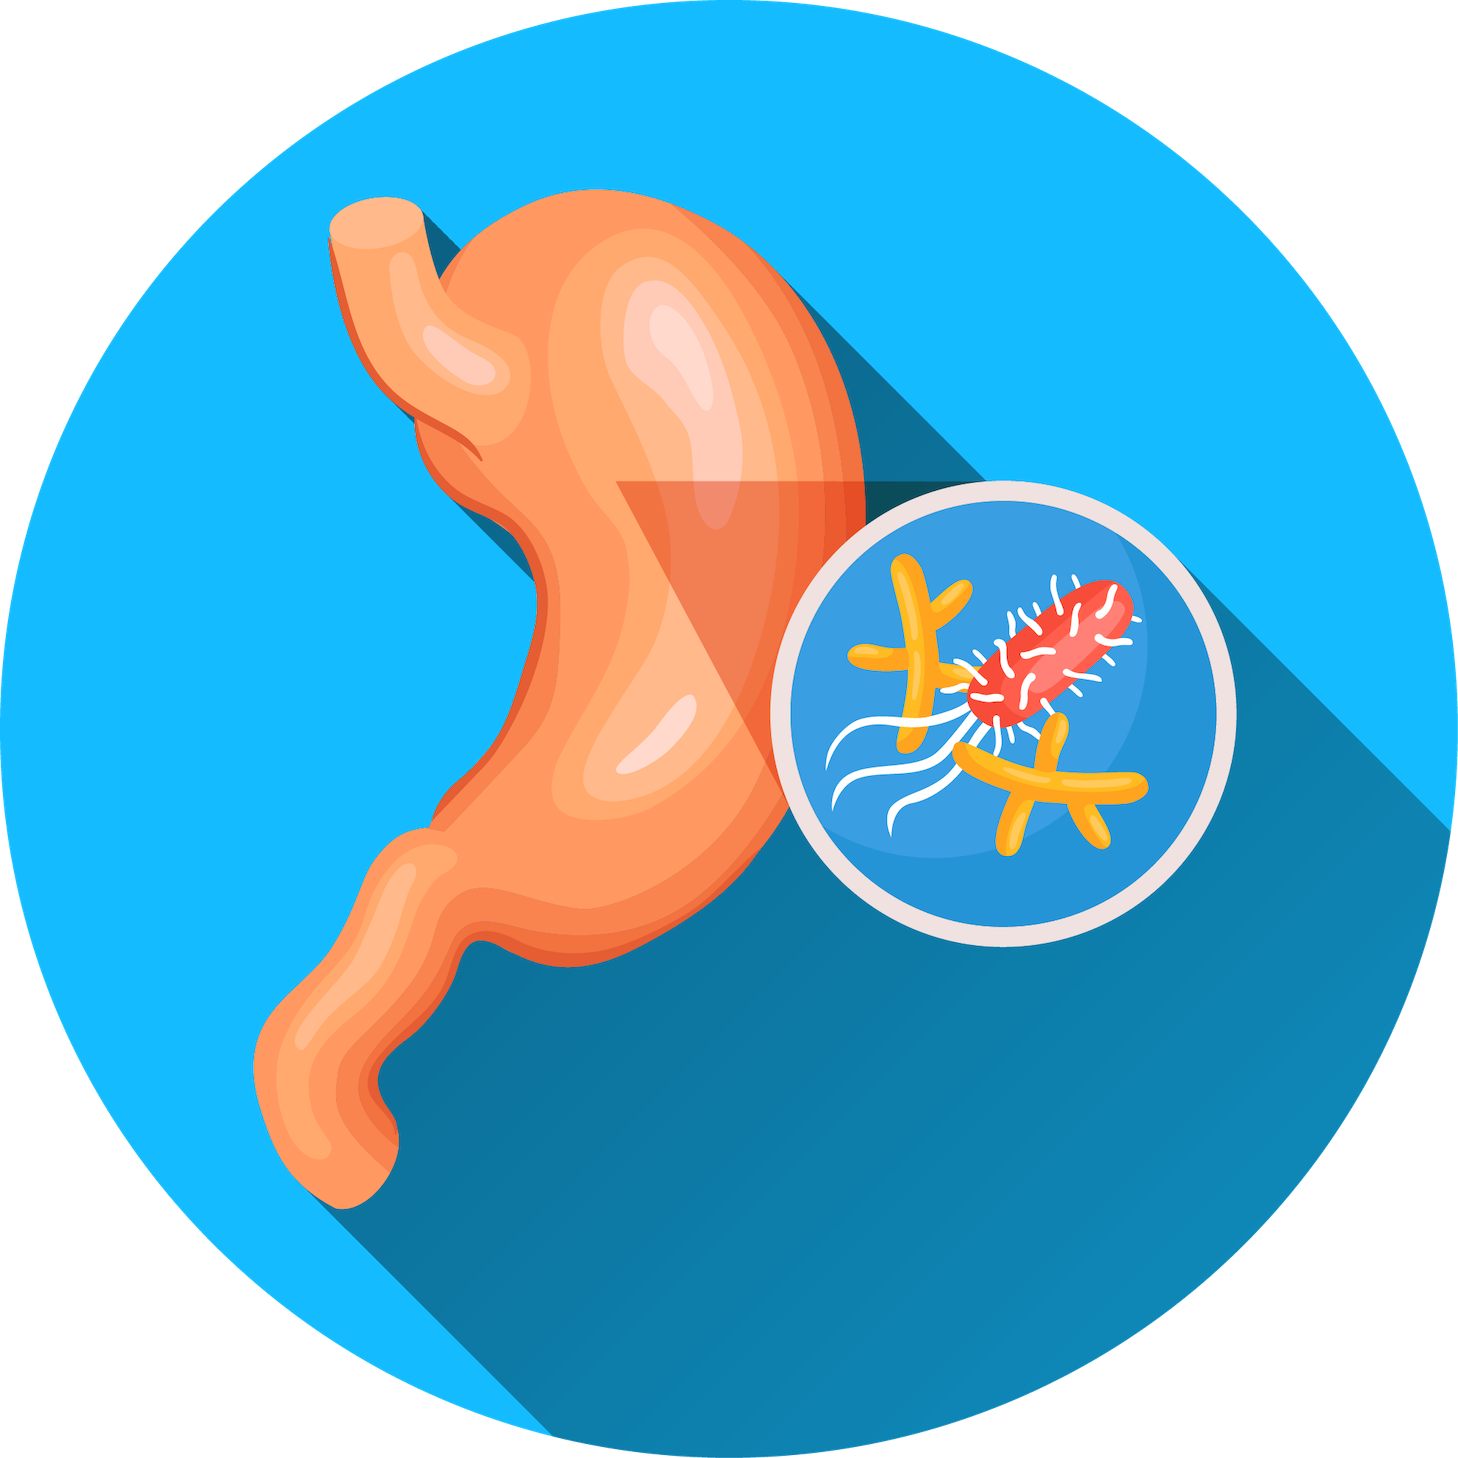 Navigation icon with graphic representation of a stomach or foodborne illness